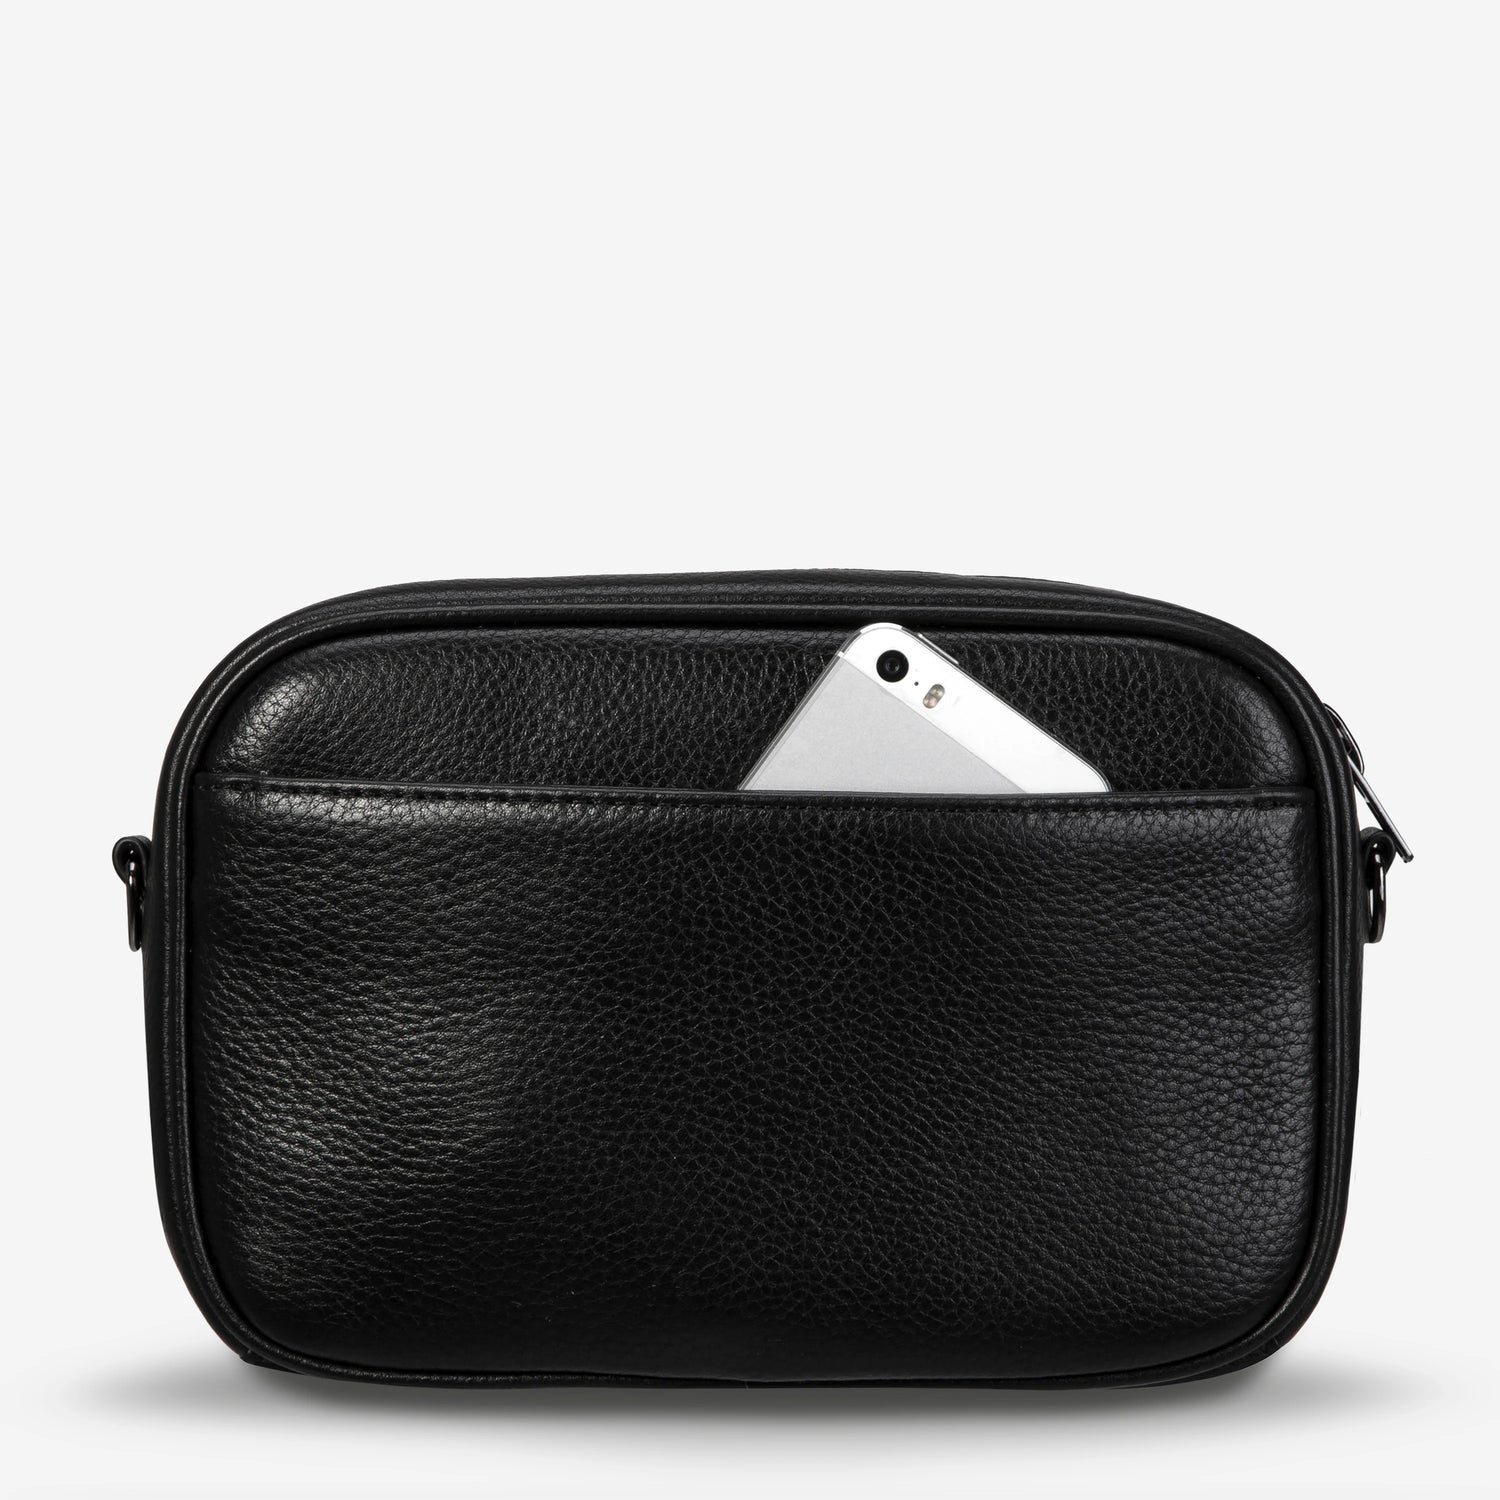 Status Anxiety Bag - Plunder with Webbed Strap in Black